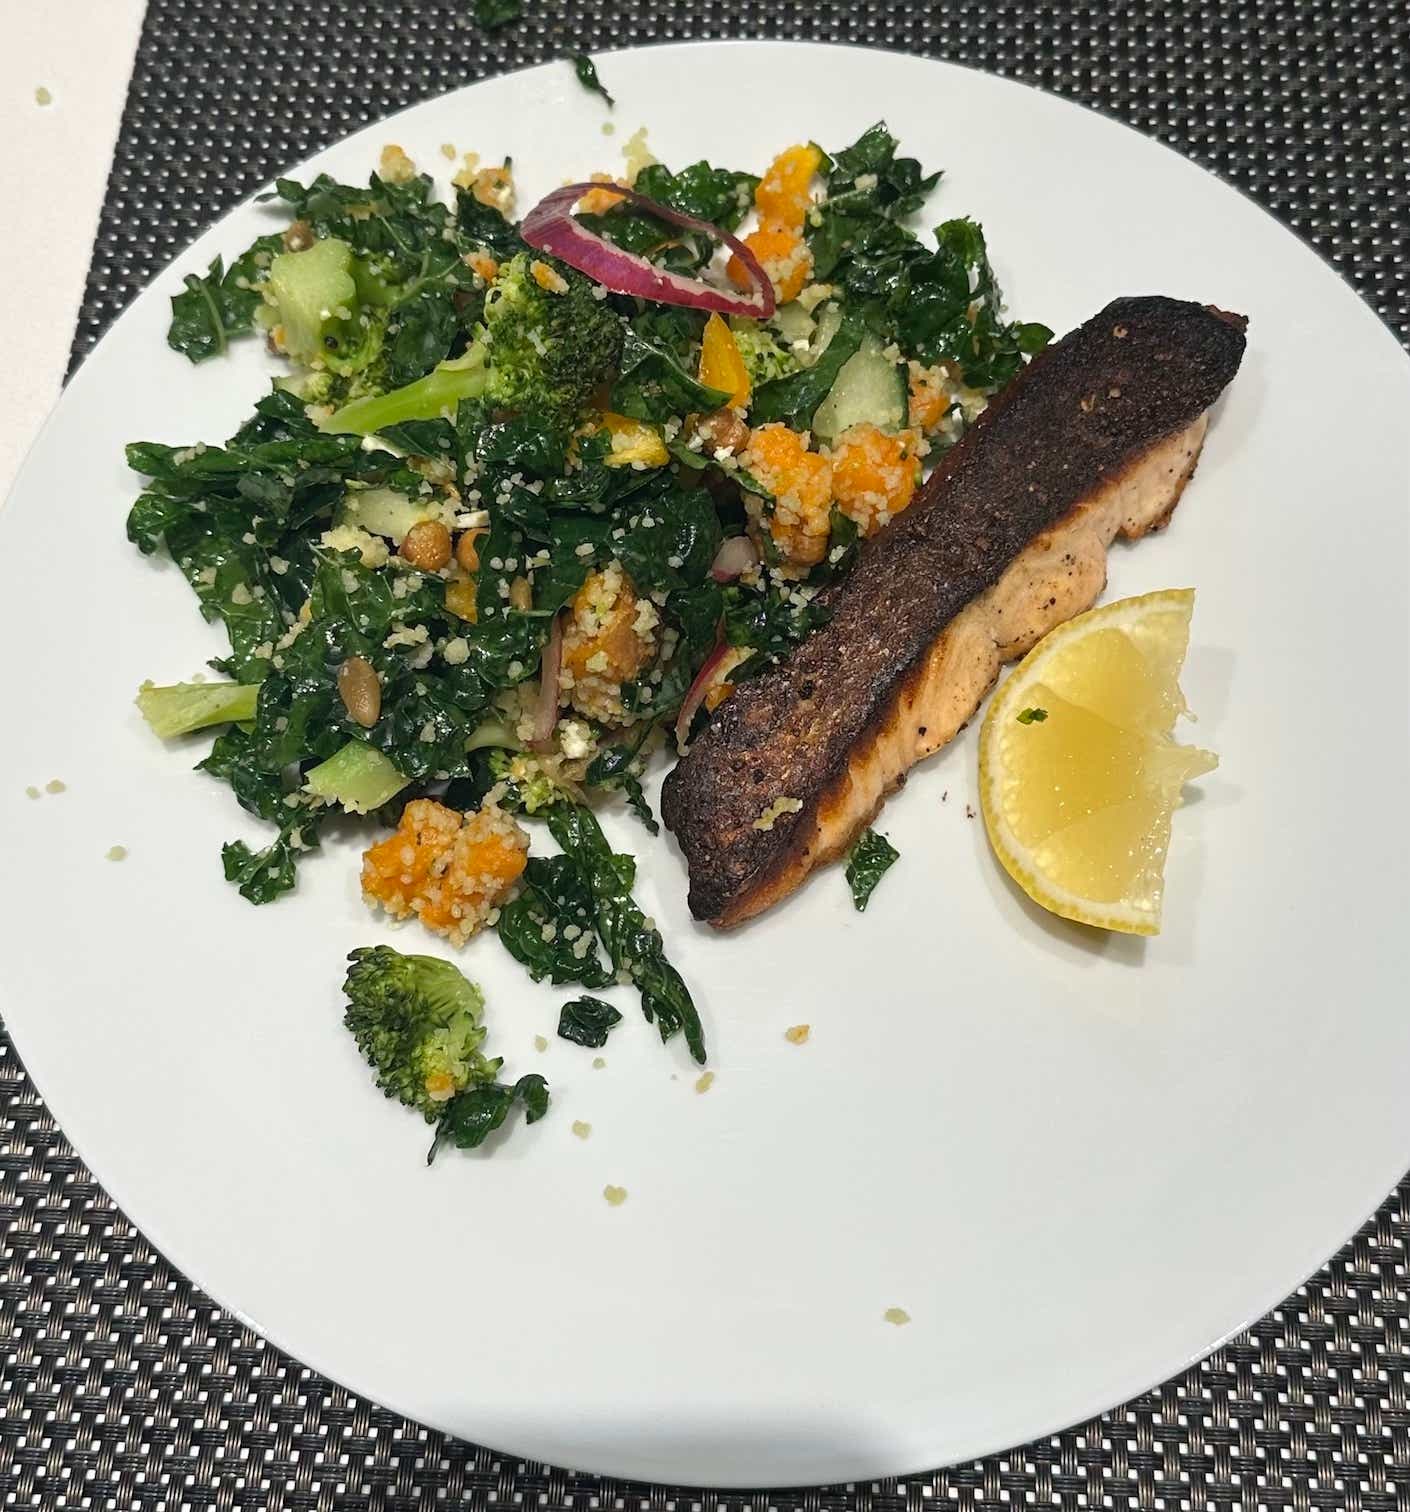 A plate of salmon and salad.